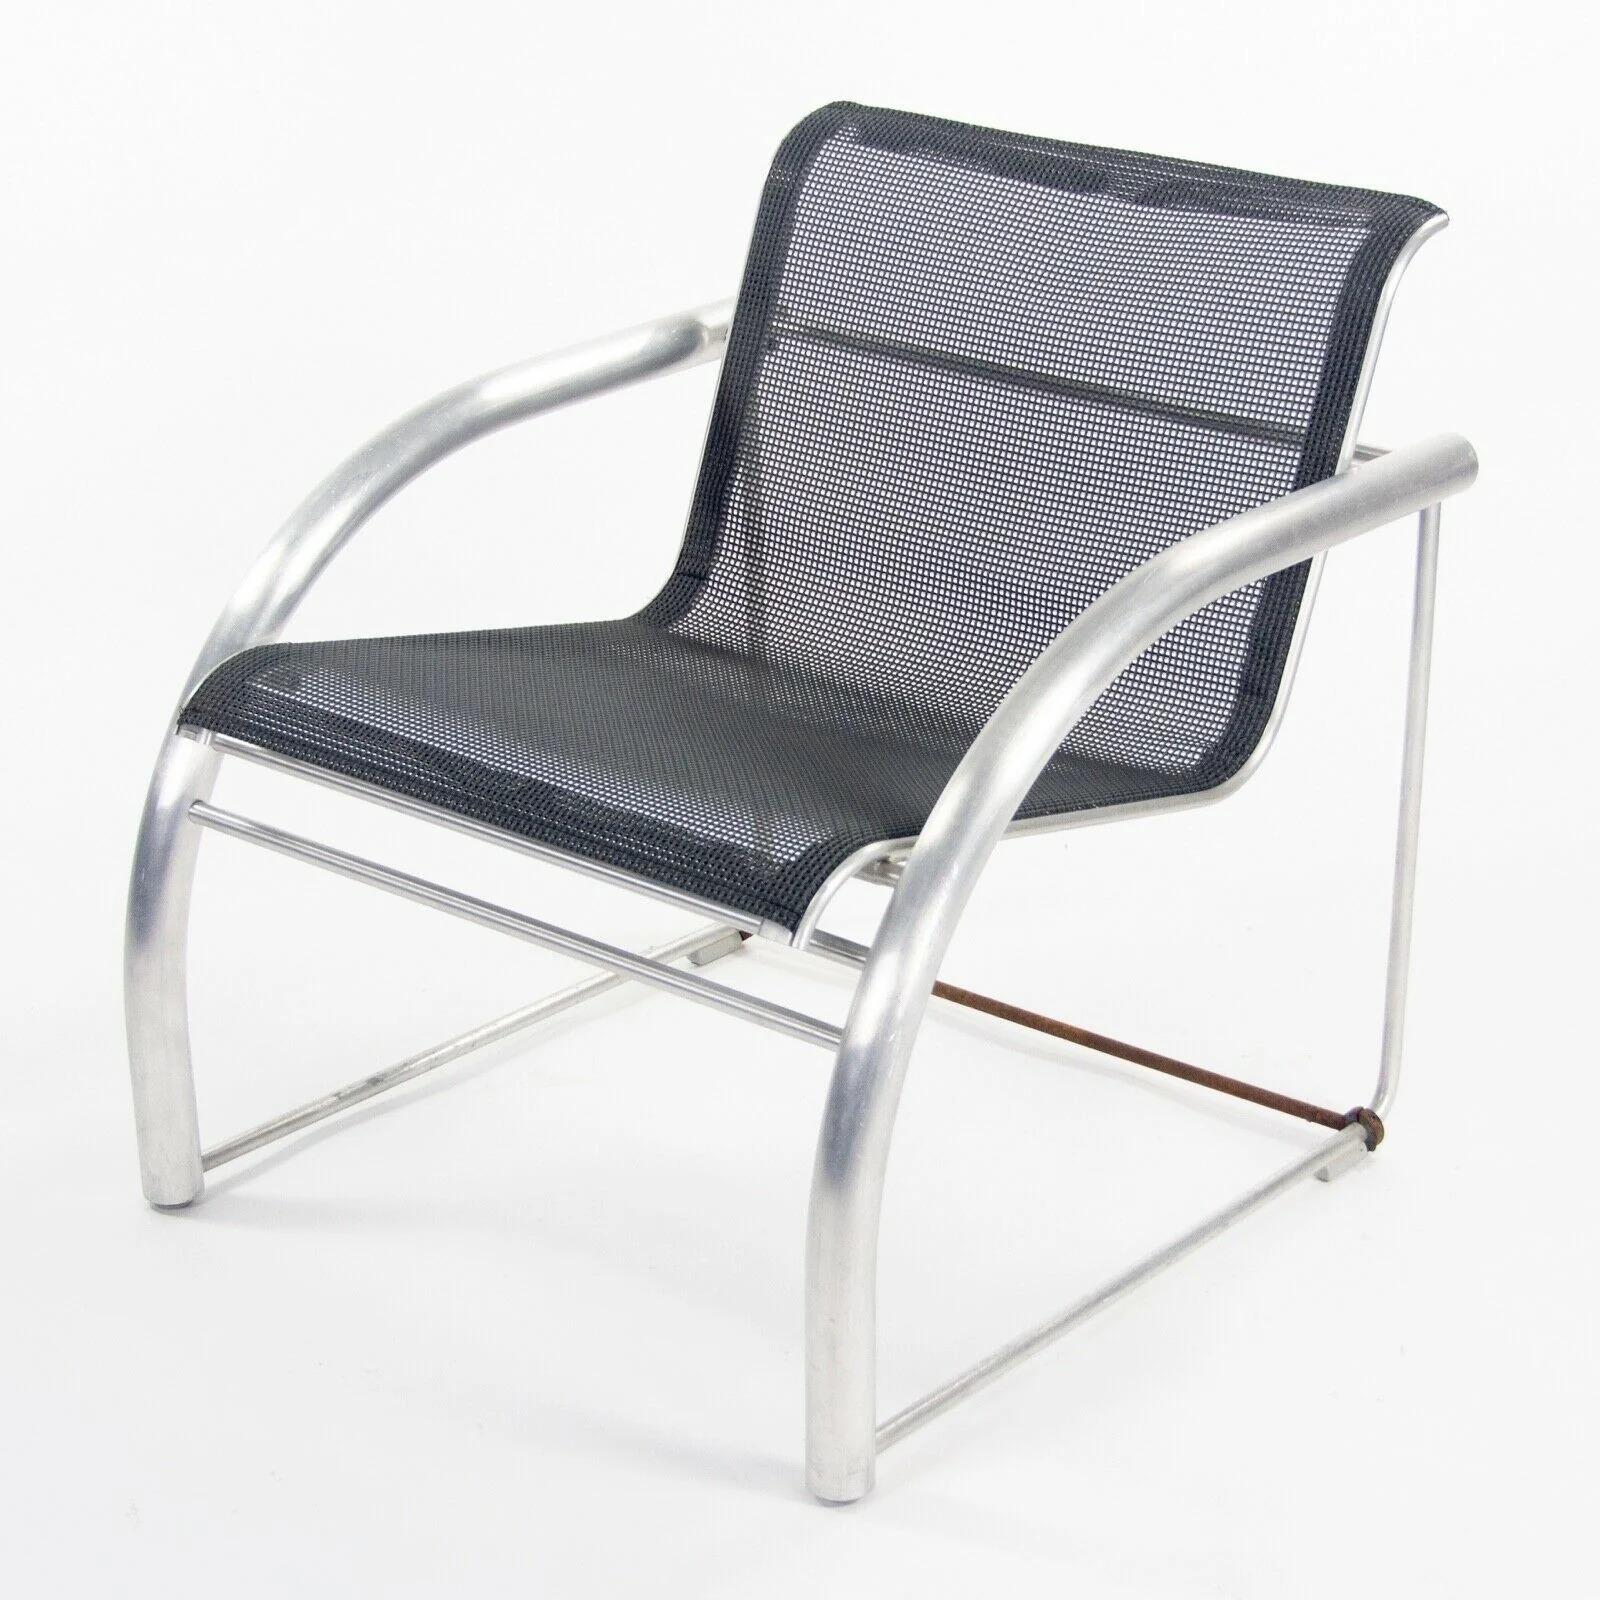 2011 Prototype Richard Schultz Mateo Collection Raw Aluminum & Mesh Dining Chair For Sale 4